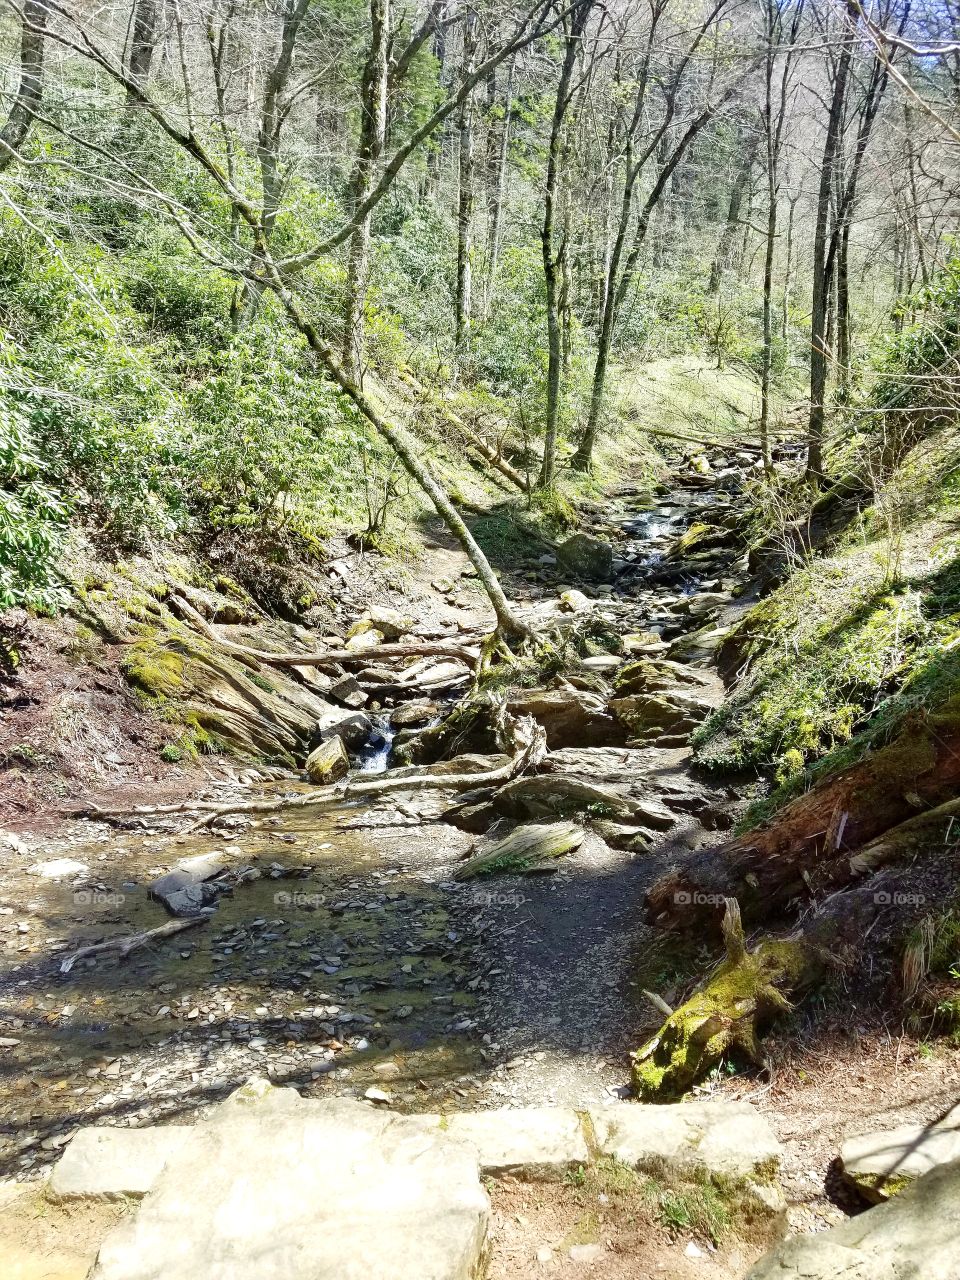 Natural beauty of greens within forest with running stream of Great Smoky Mountains National Park.